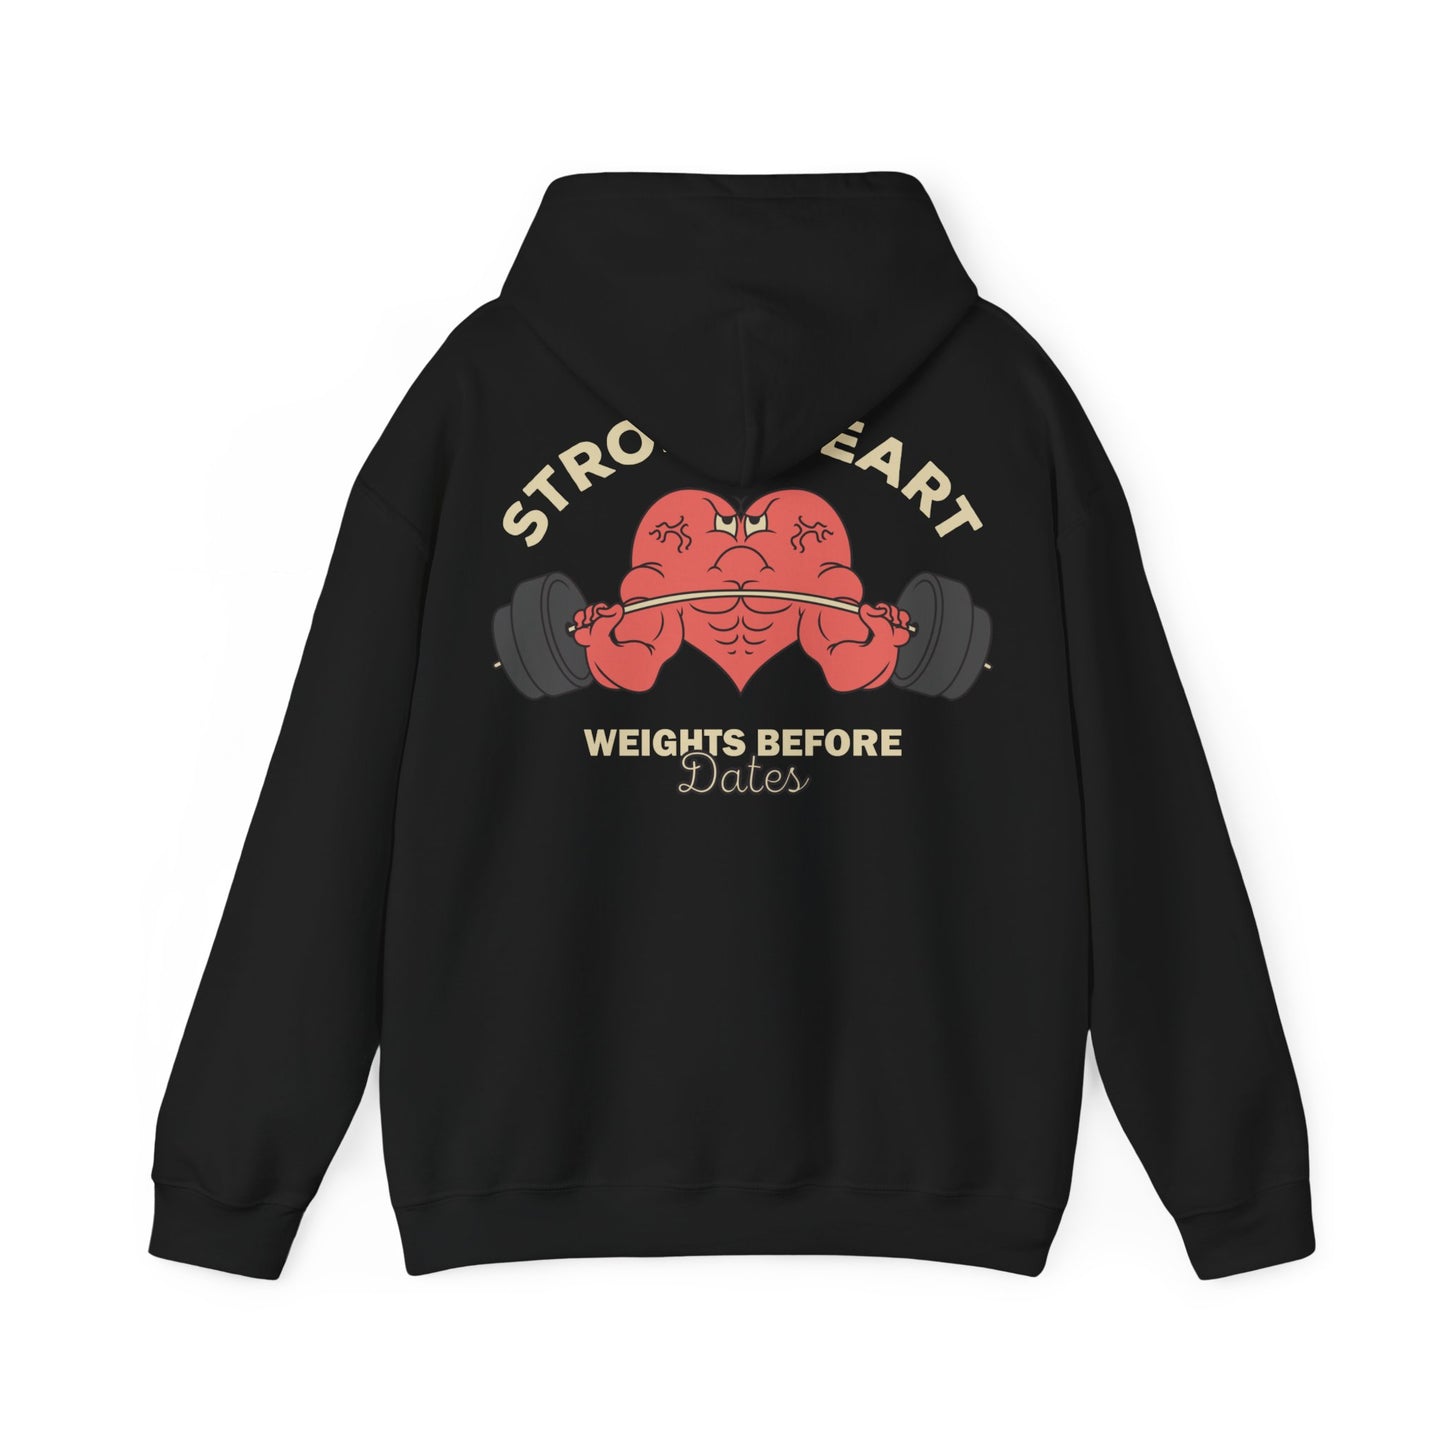 STRONG HEART x Hoodie